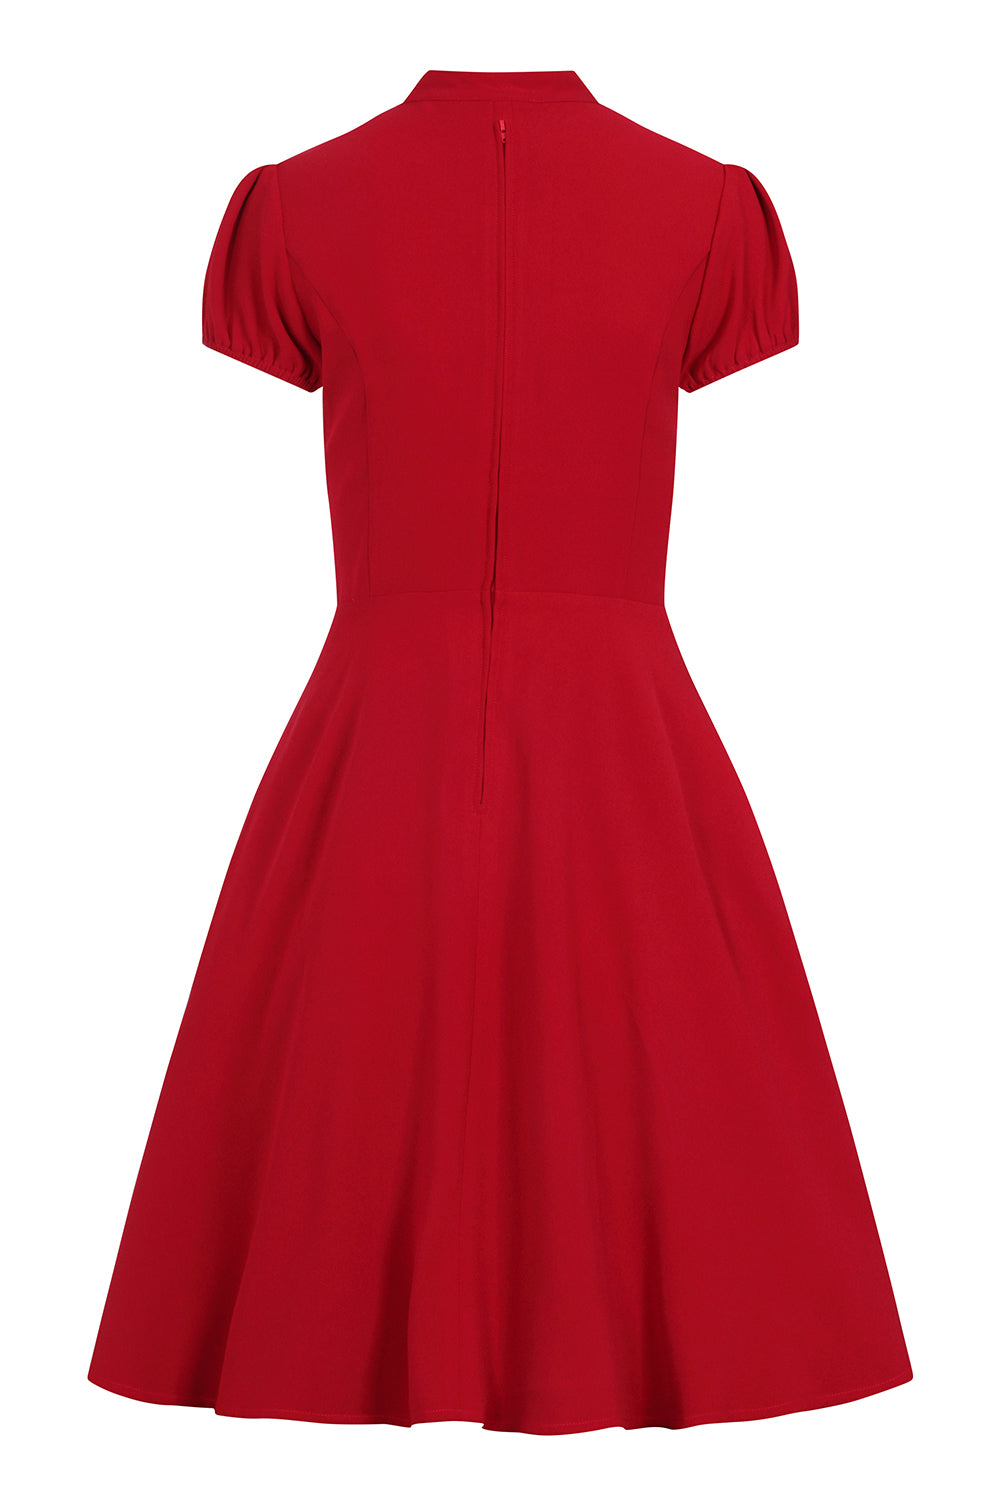 Millie Dress in Red by Hell Bunny